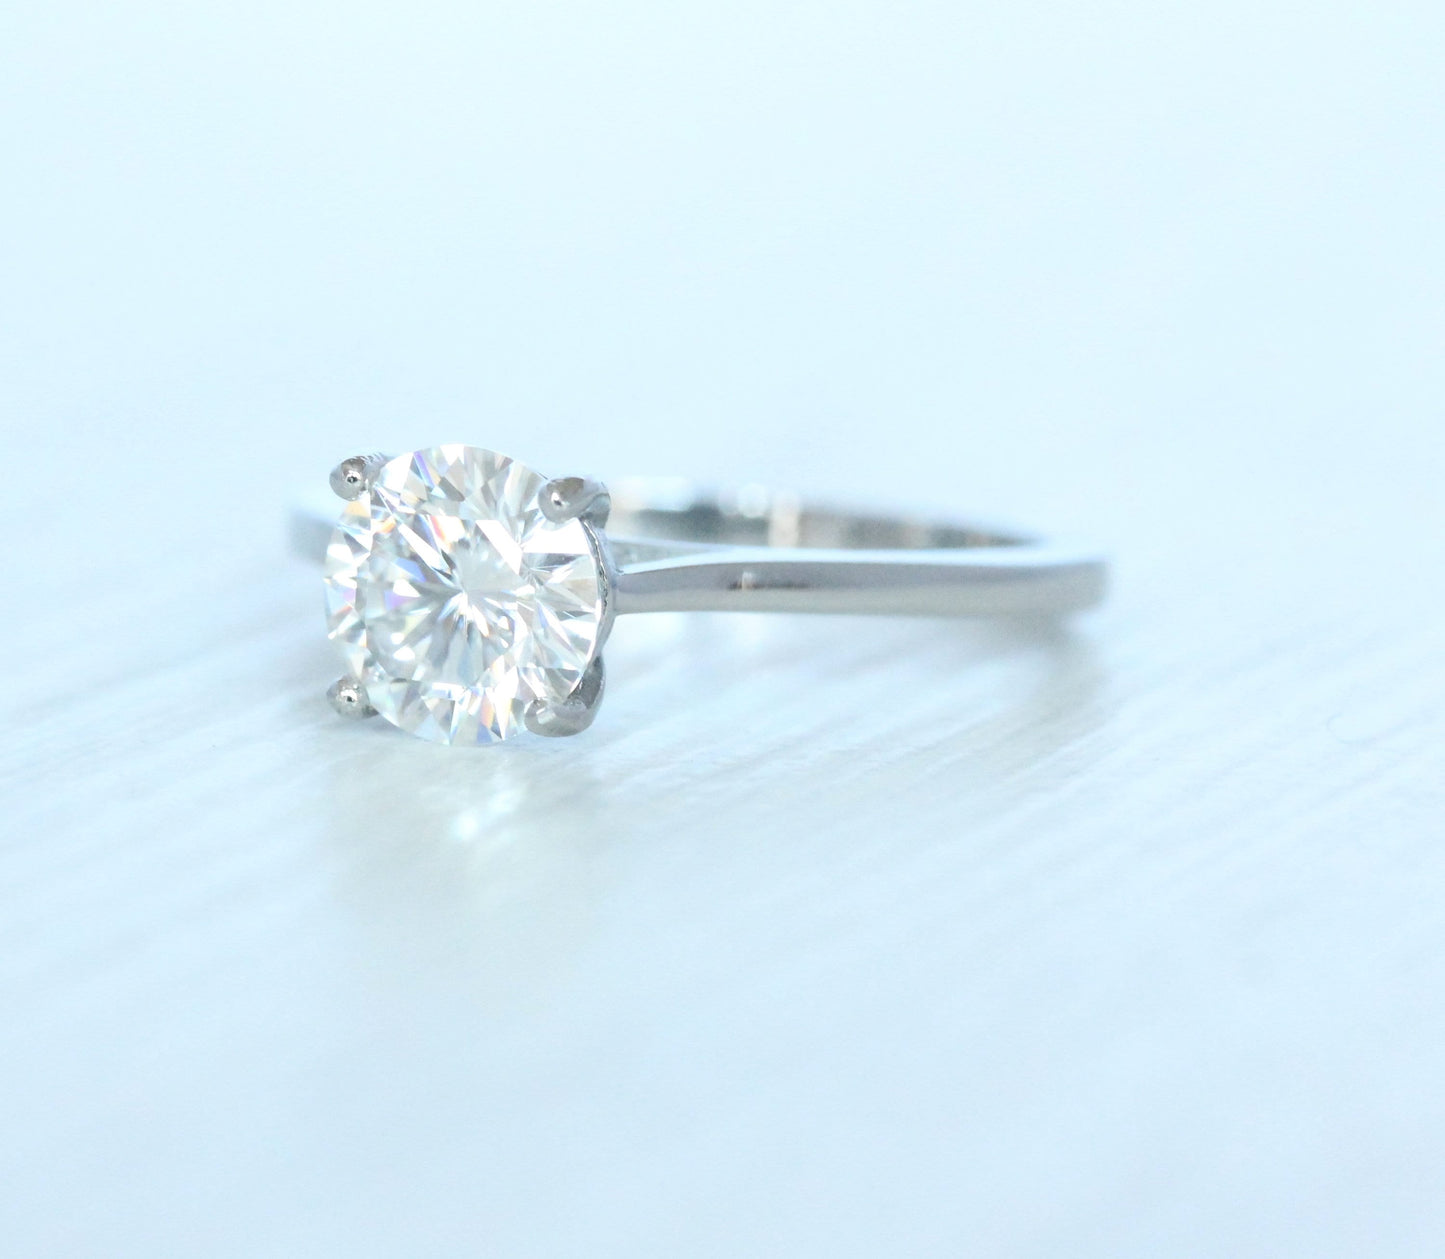 16 Hearts and 16 Arrows Cut Genuine White Moissanite engagement ring, 1ct, 1.5ct and 2ct options